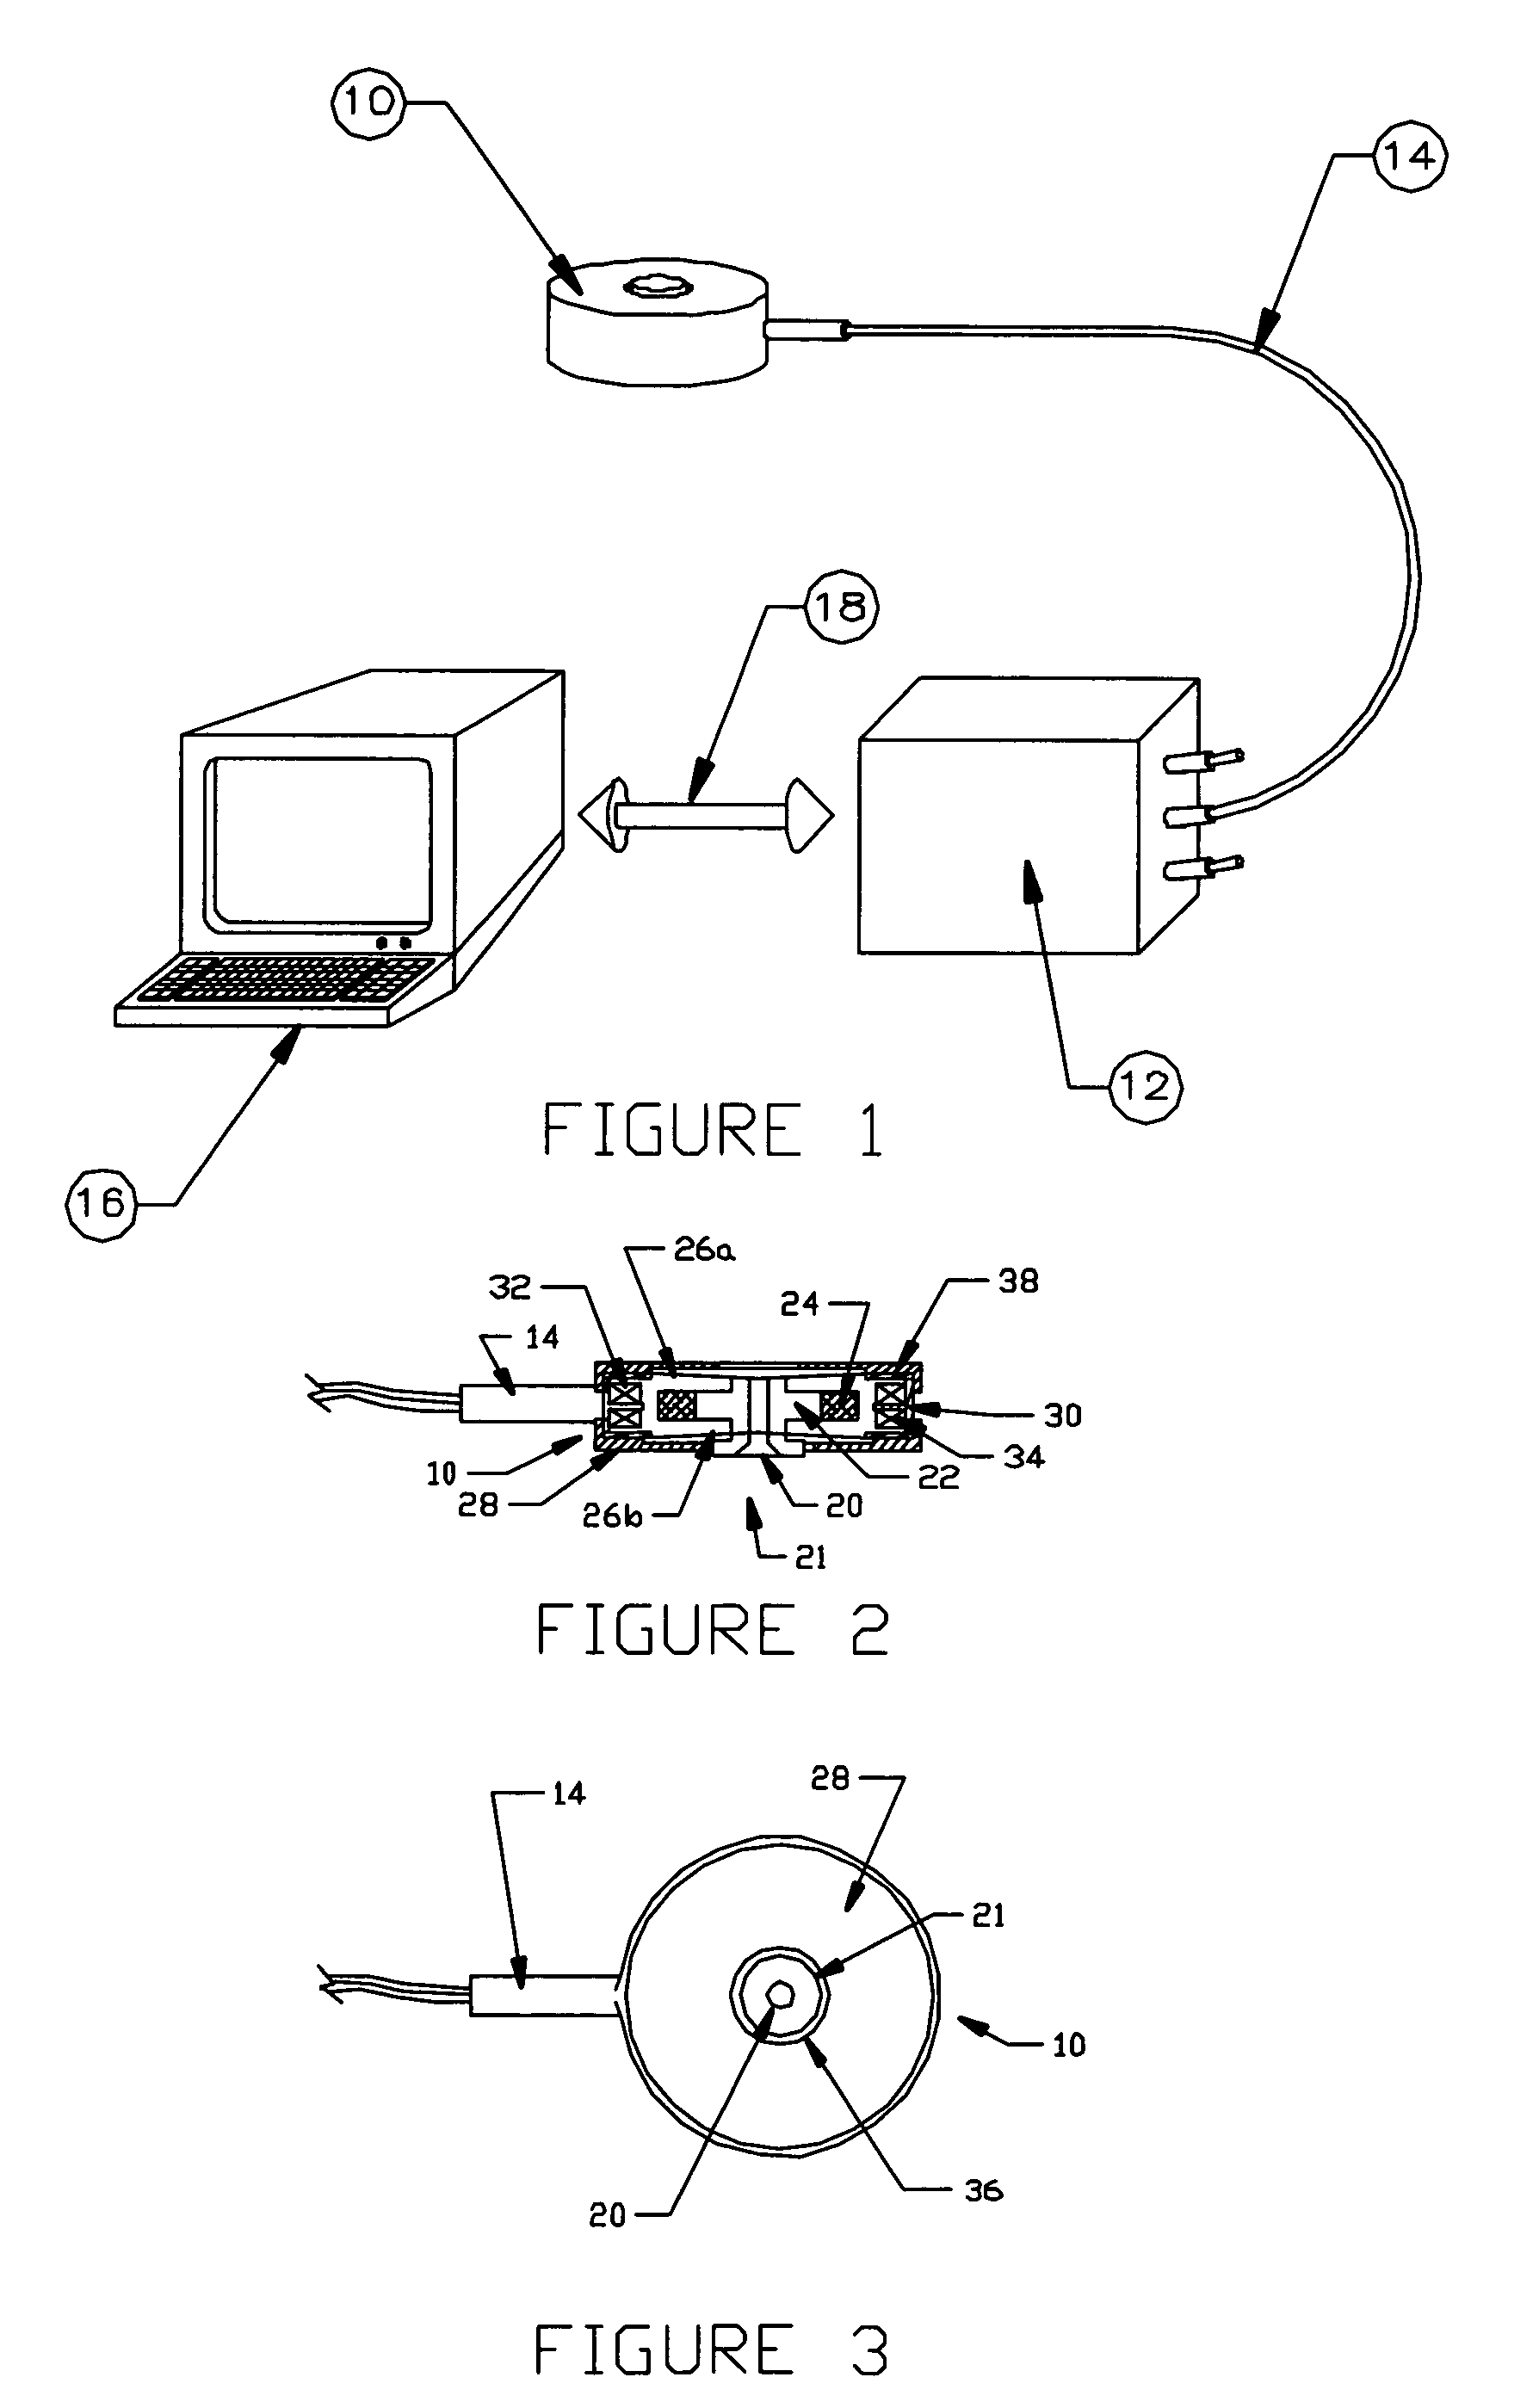 Method and apparatus for generating a vibrational stimulus